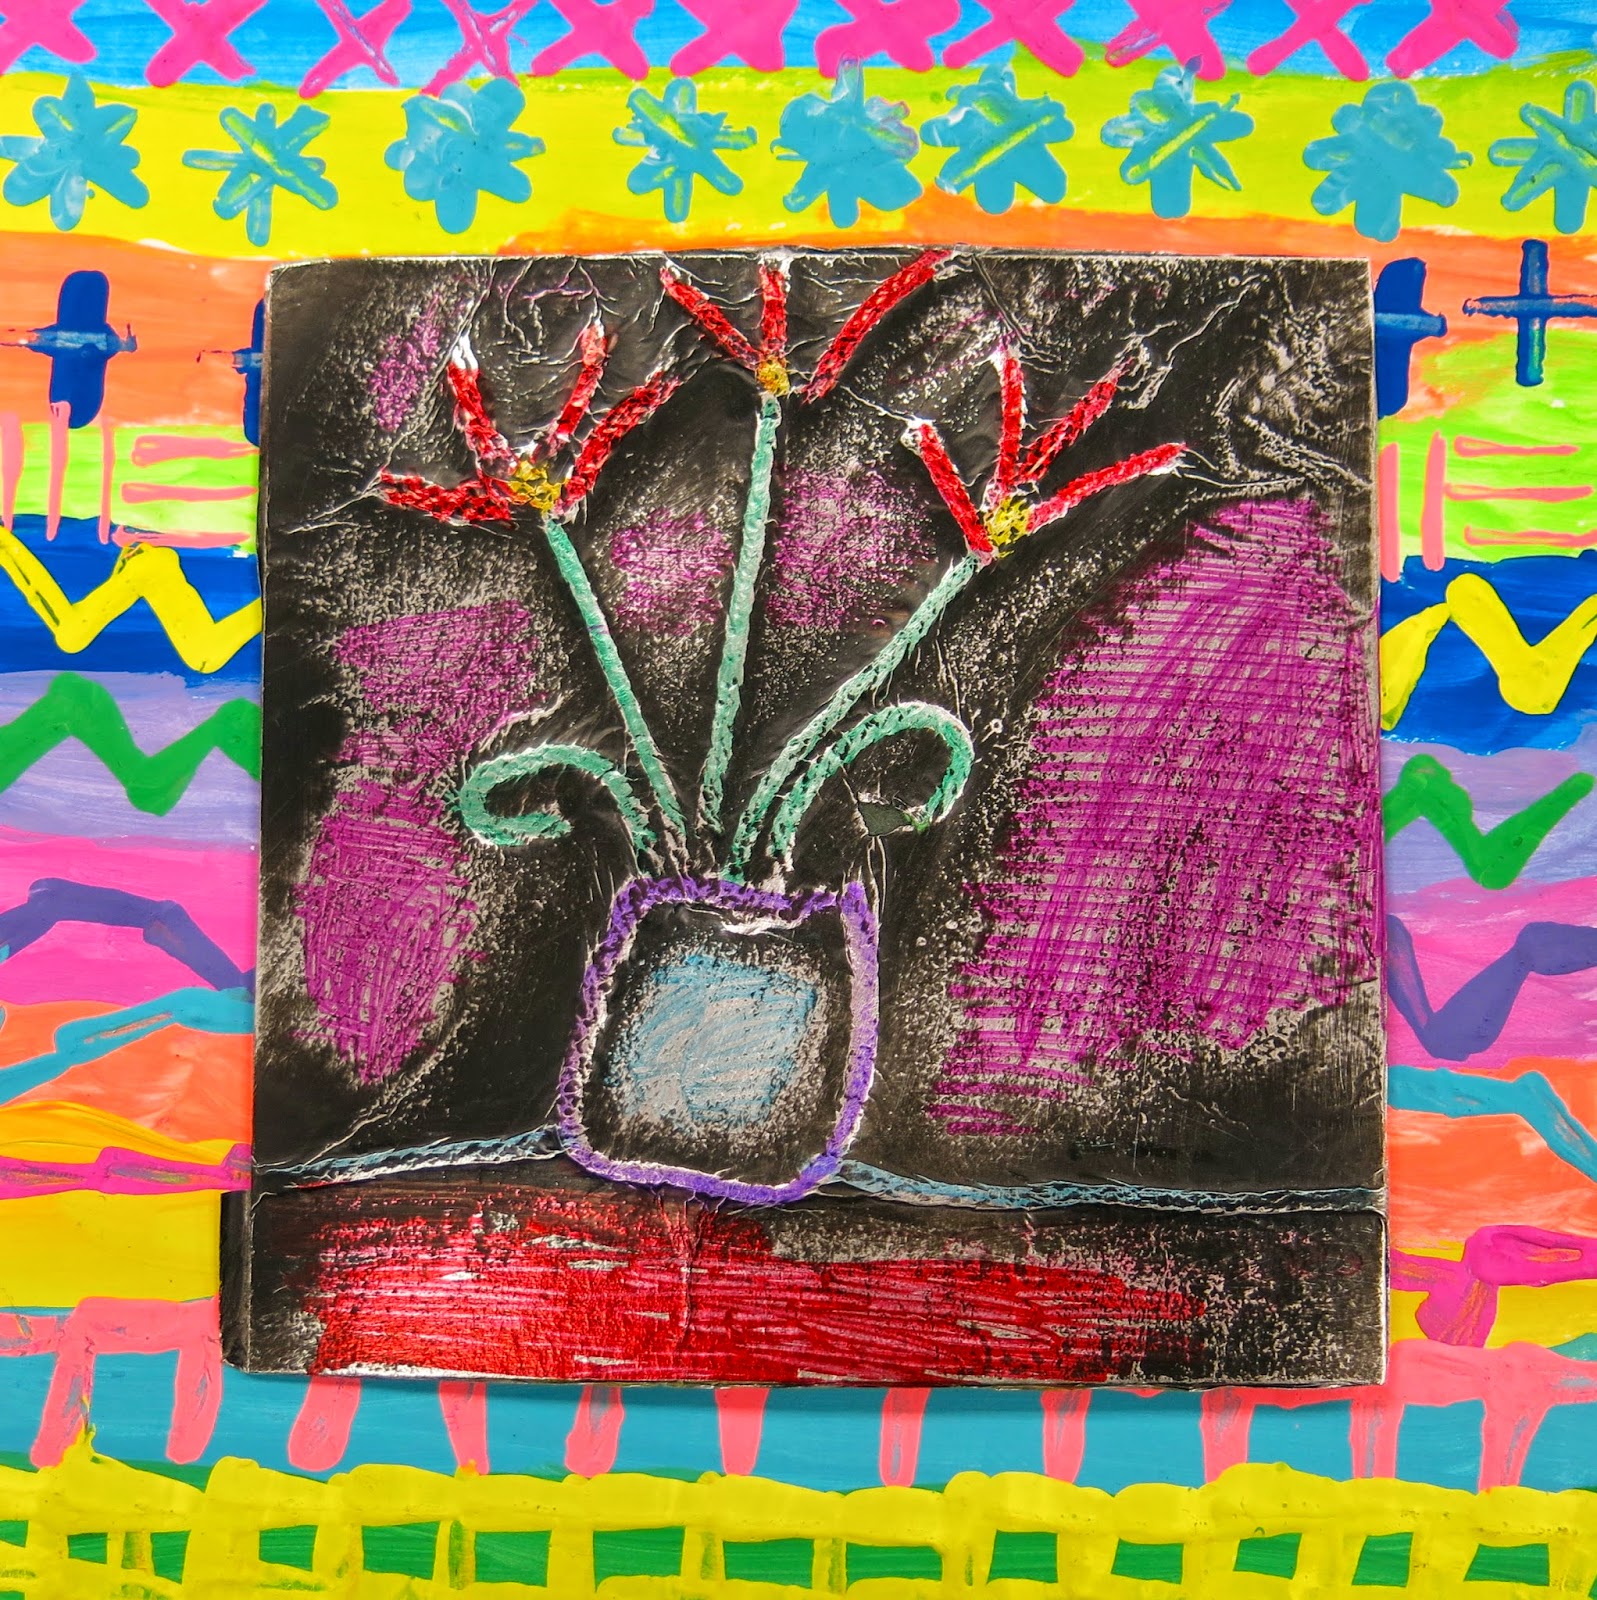 Yarn Art Paintings with Kids :: Use Yarn to Draw Images & Fill in With Paint